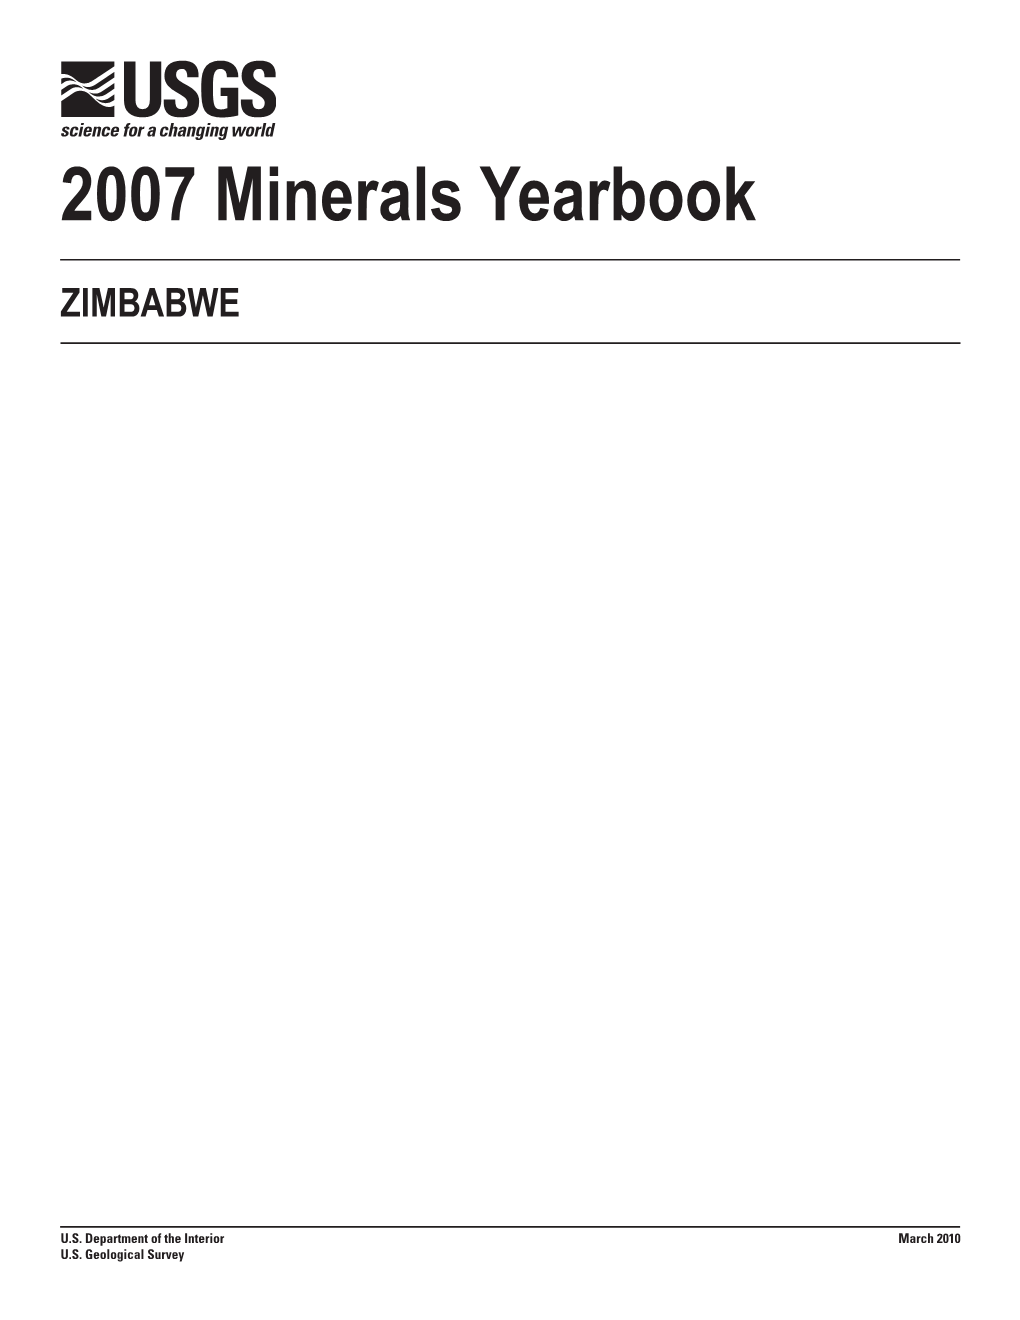 The Mineral Industry of Zimbabwe in 2007